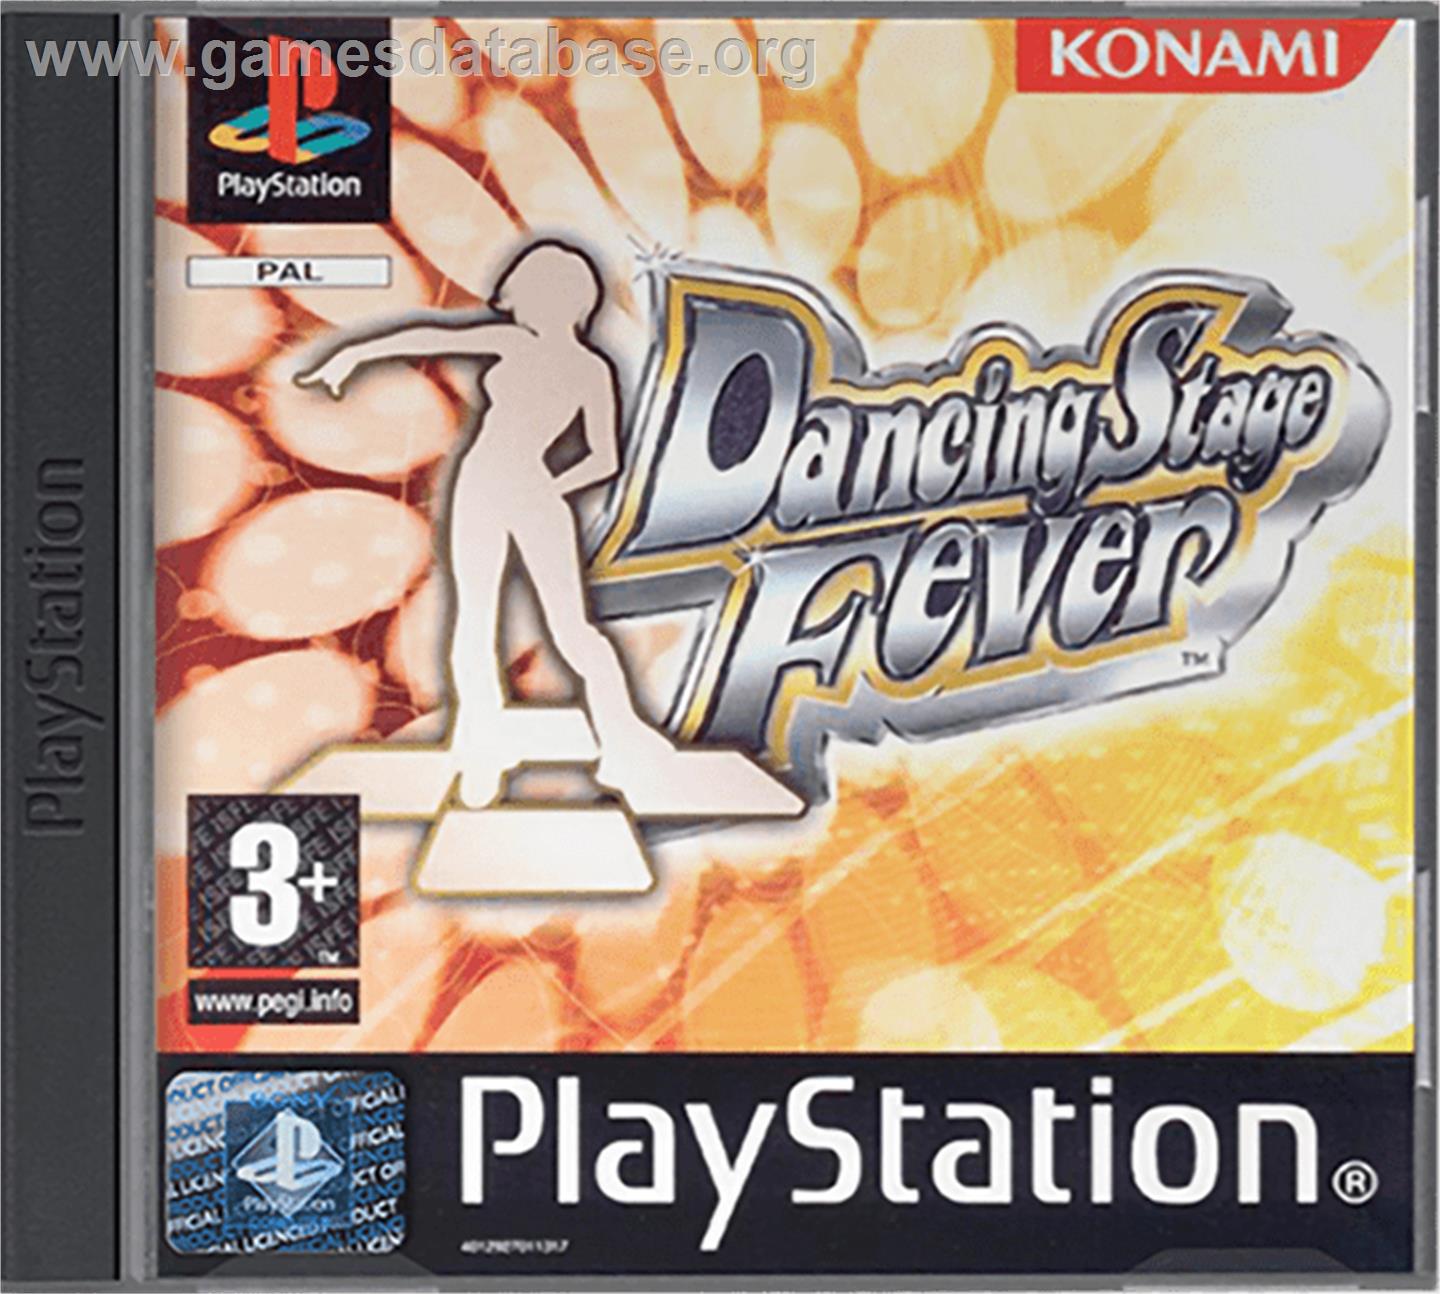 Dancing Stage Fever - Sony Playstation - Artwork - Box